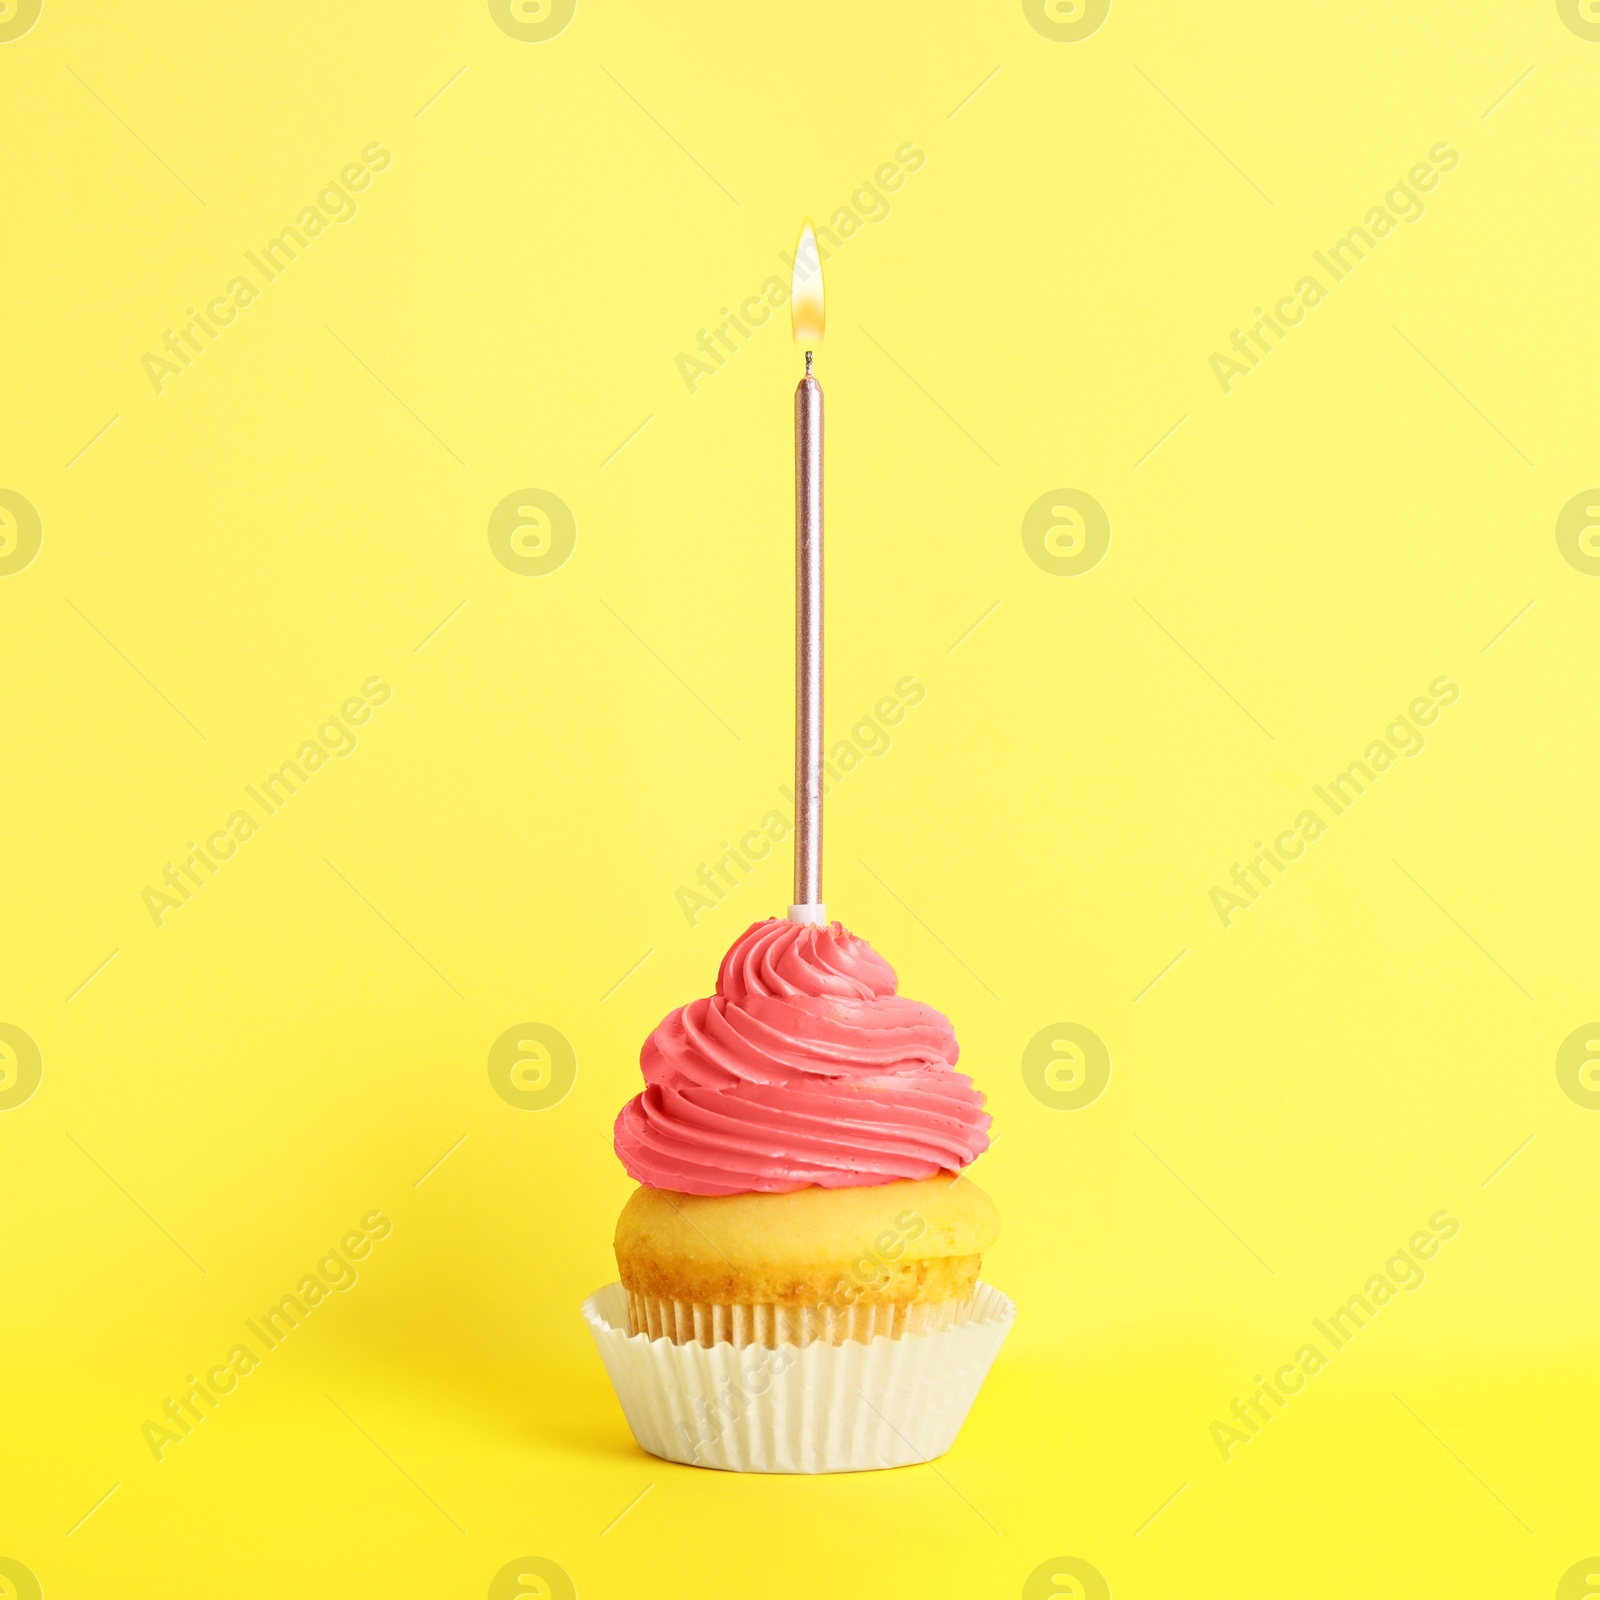 Photo of Birthday cupcake with candle on yellow background